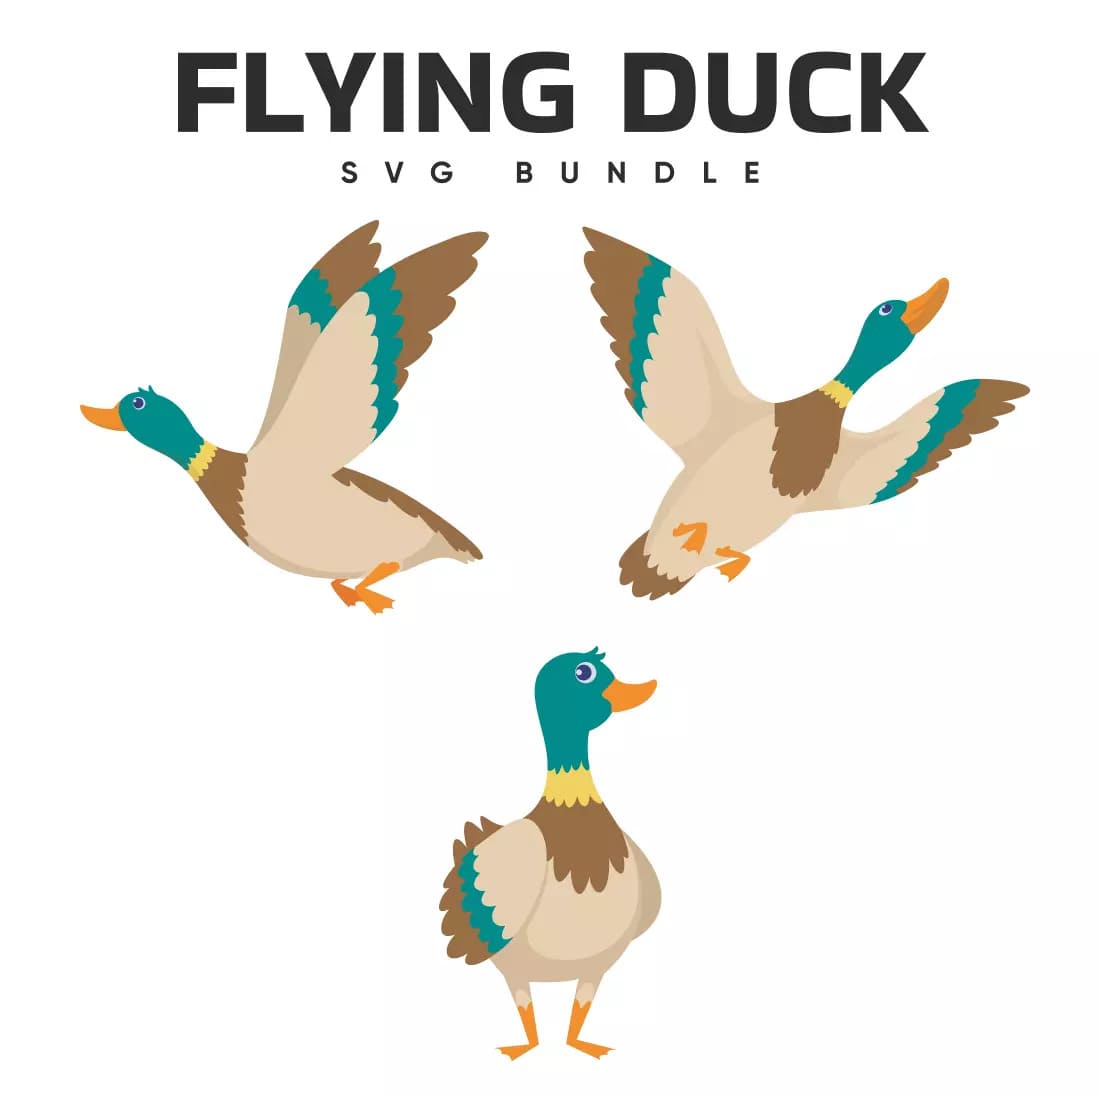 Three ducks flying in the air with the words flying duck svg bundle.